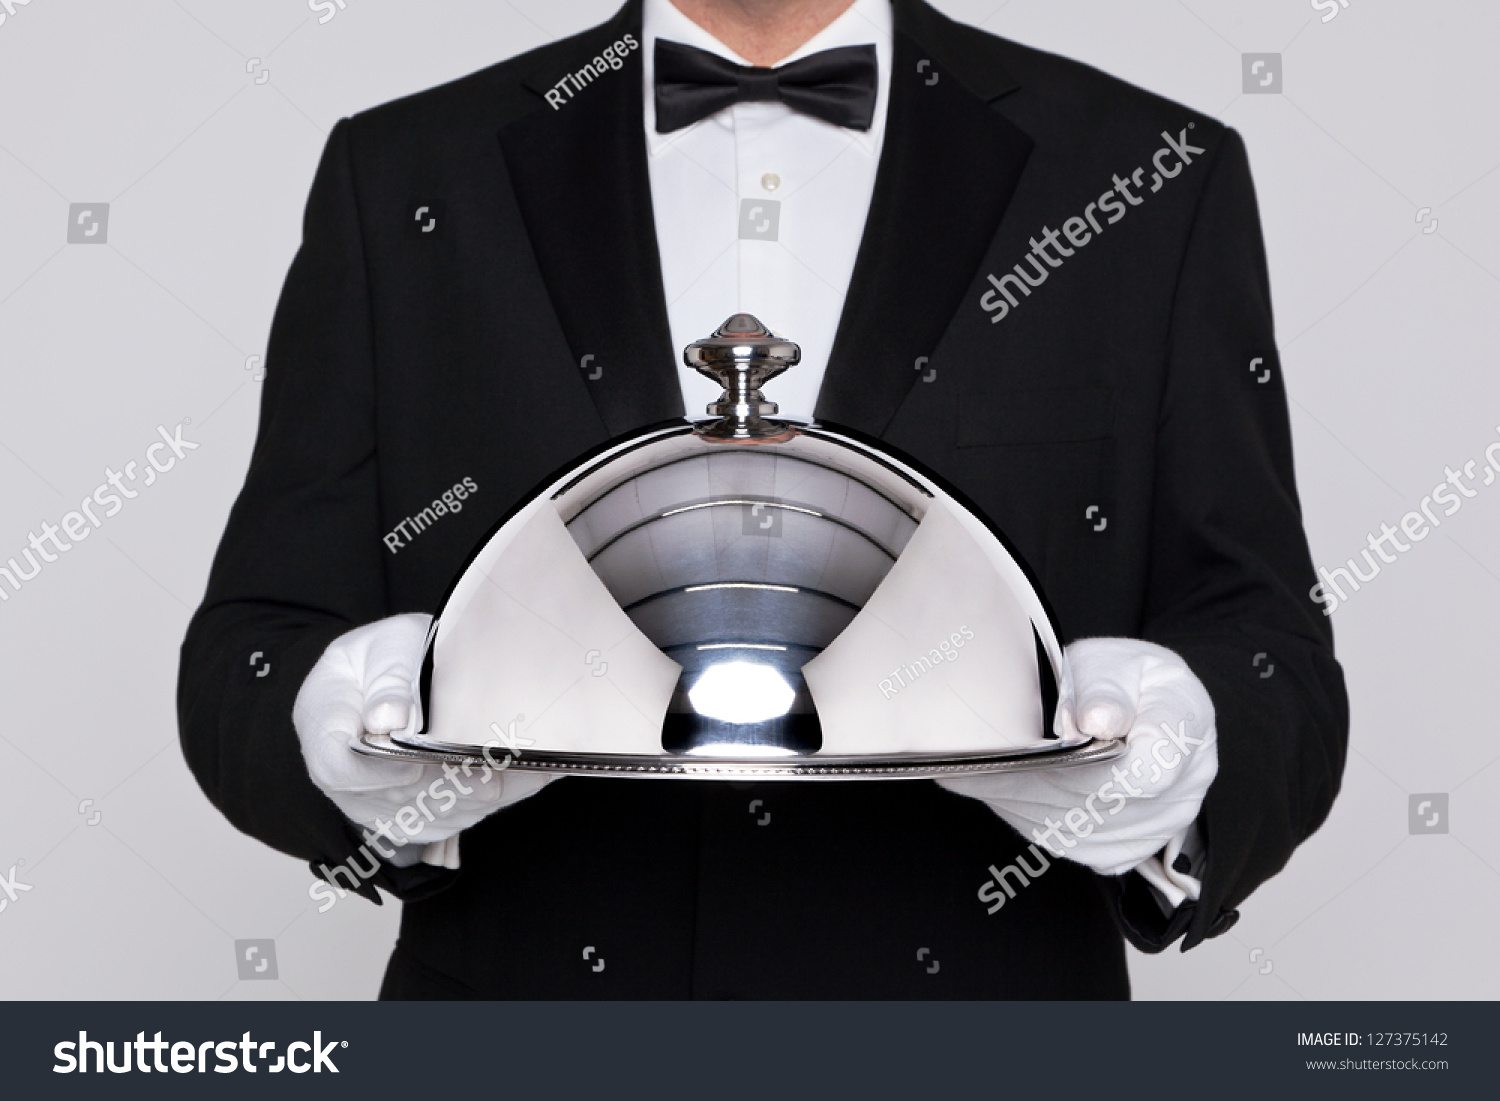 Waiter serving a meal under a silver cloche or dome #127375142